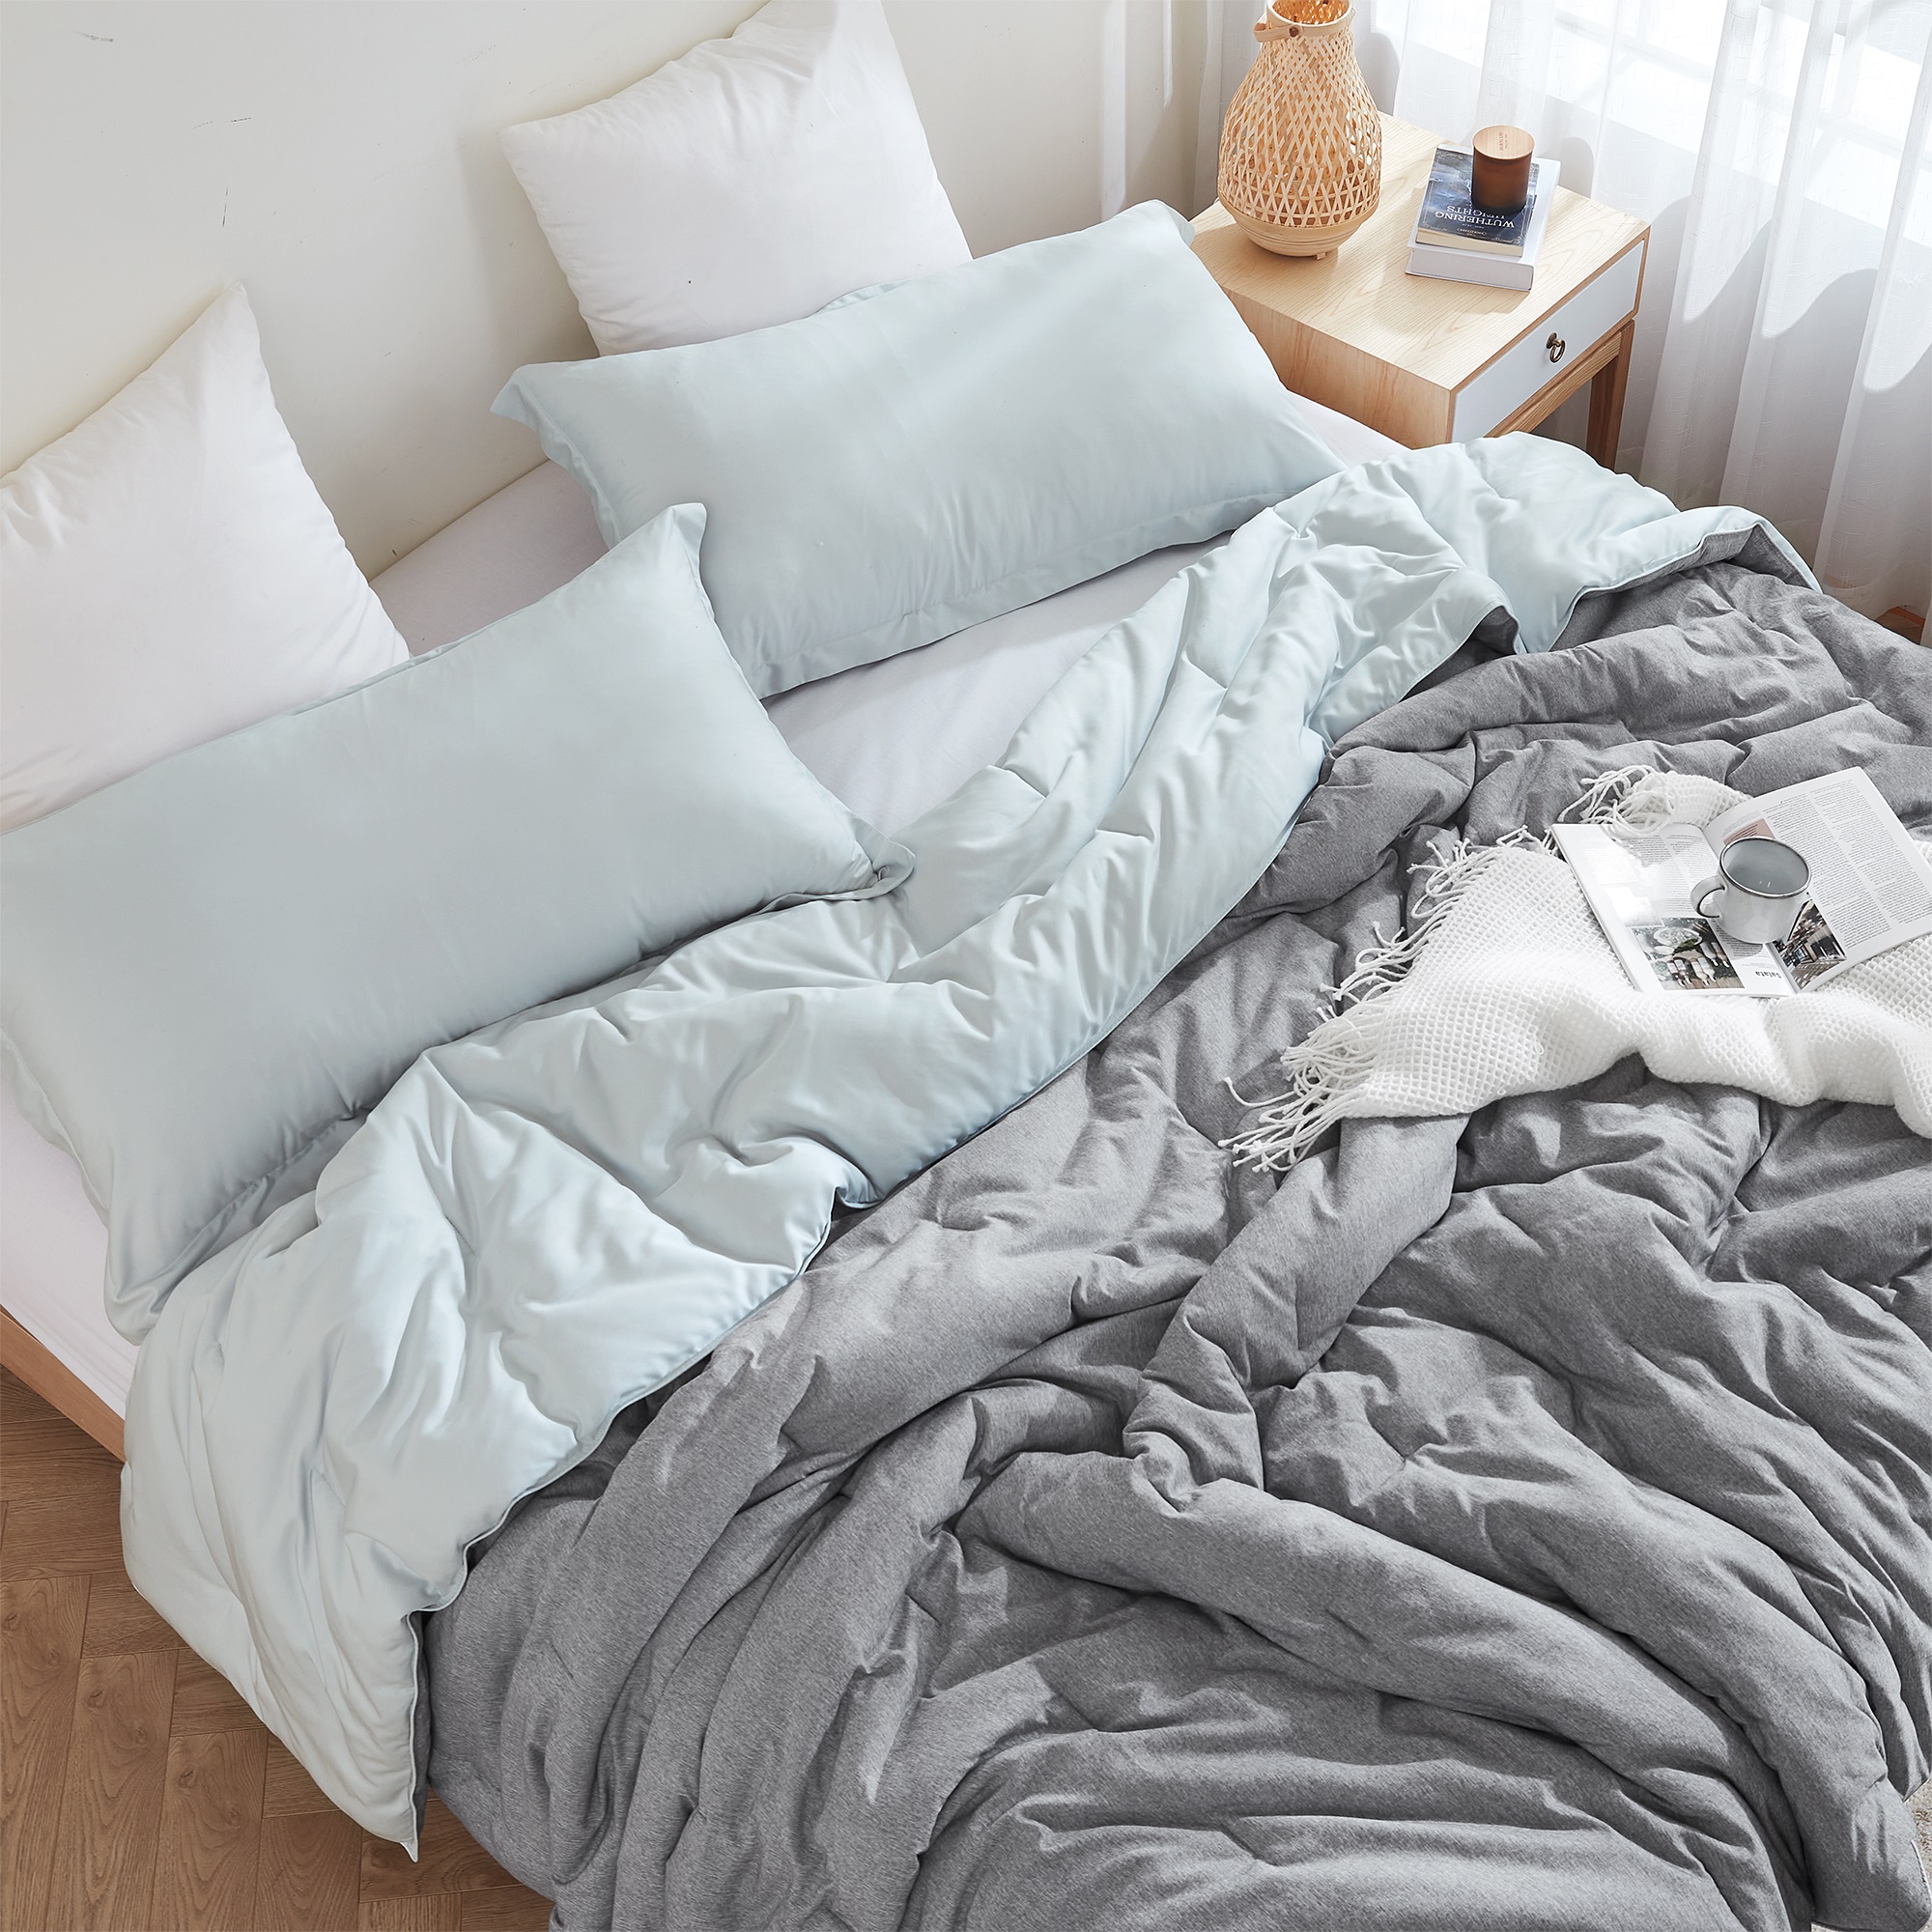 Snorze® Cloud Comforter - Coma Inducer® Ultra Cozy Bamboo